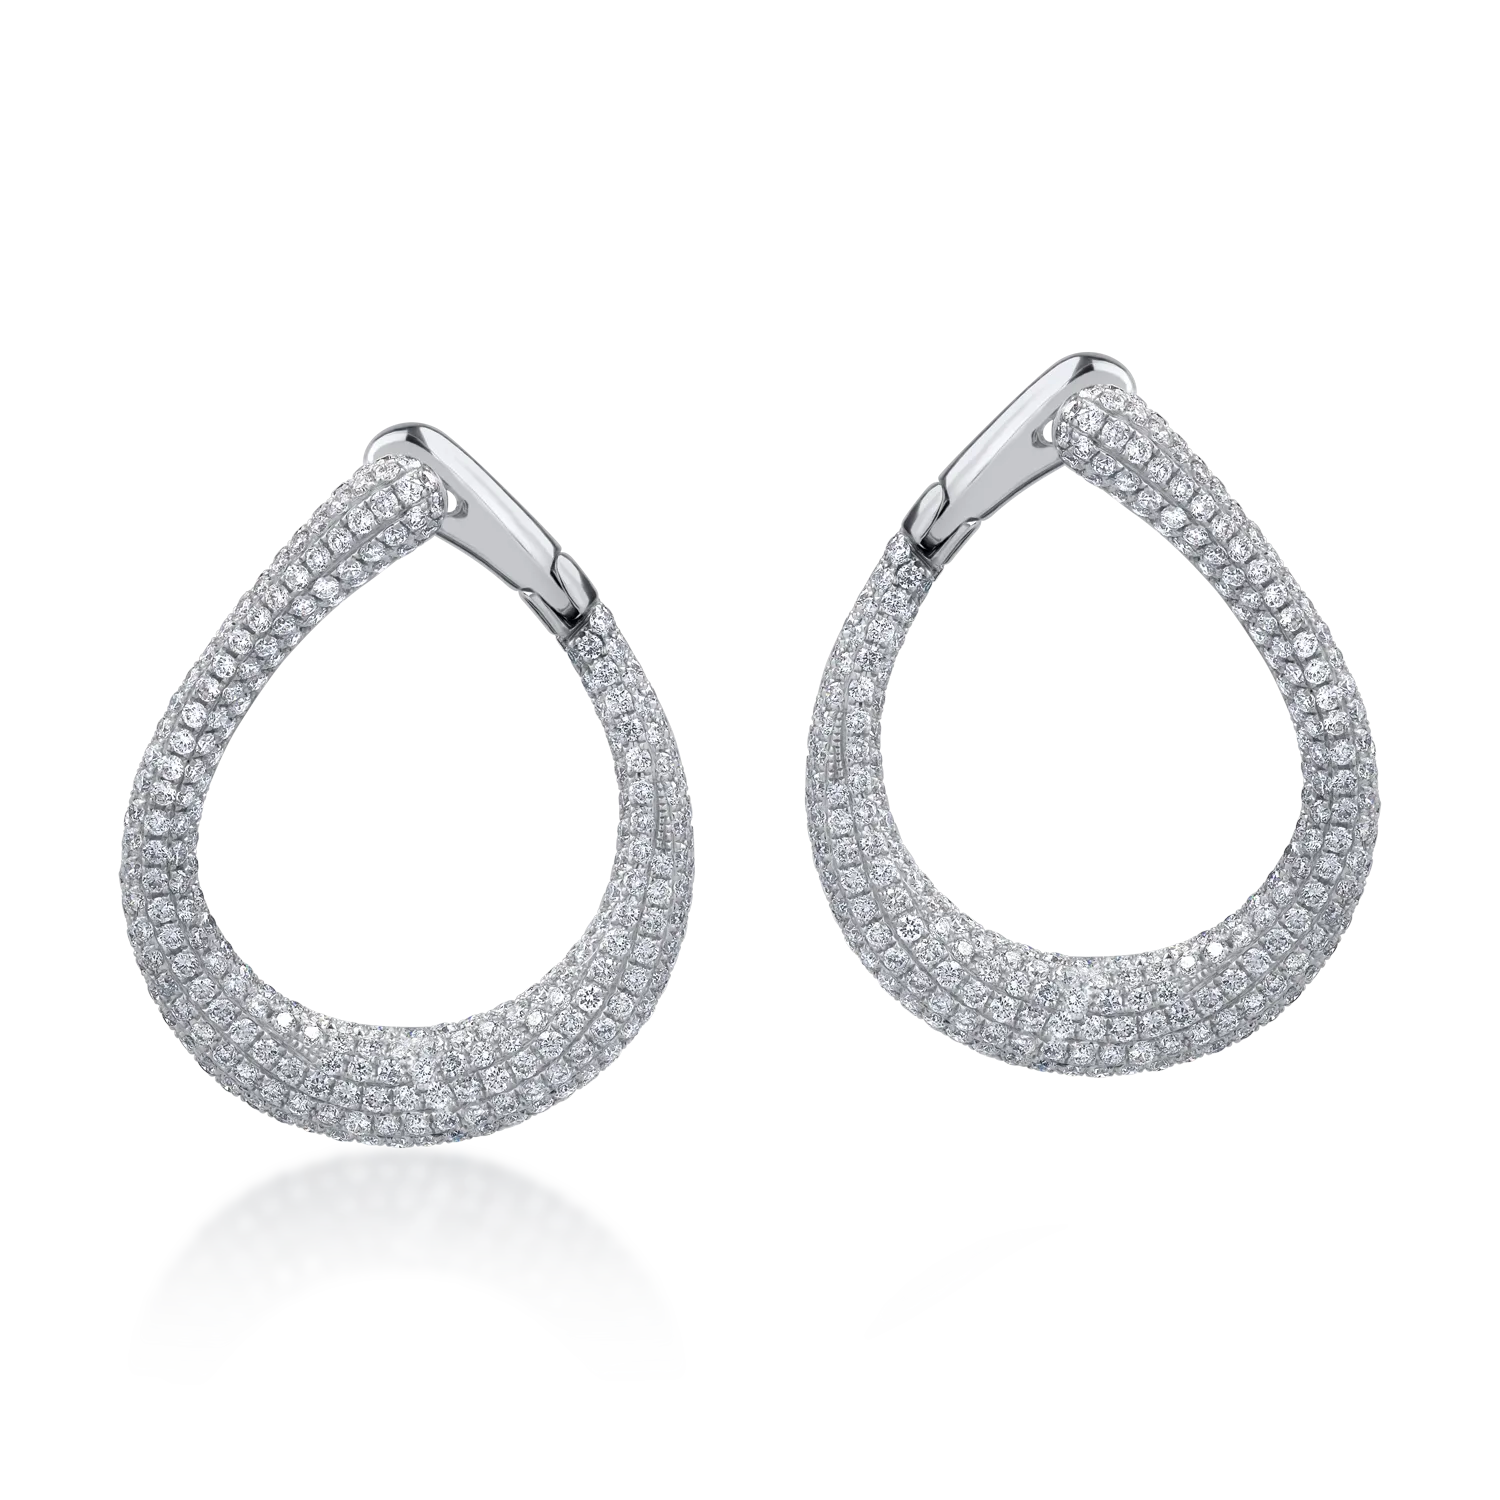 18K white gold earrings with 3.58ct diamonds